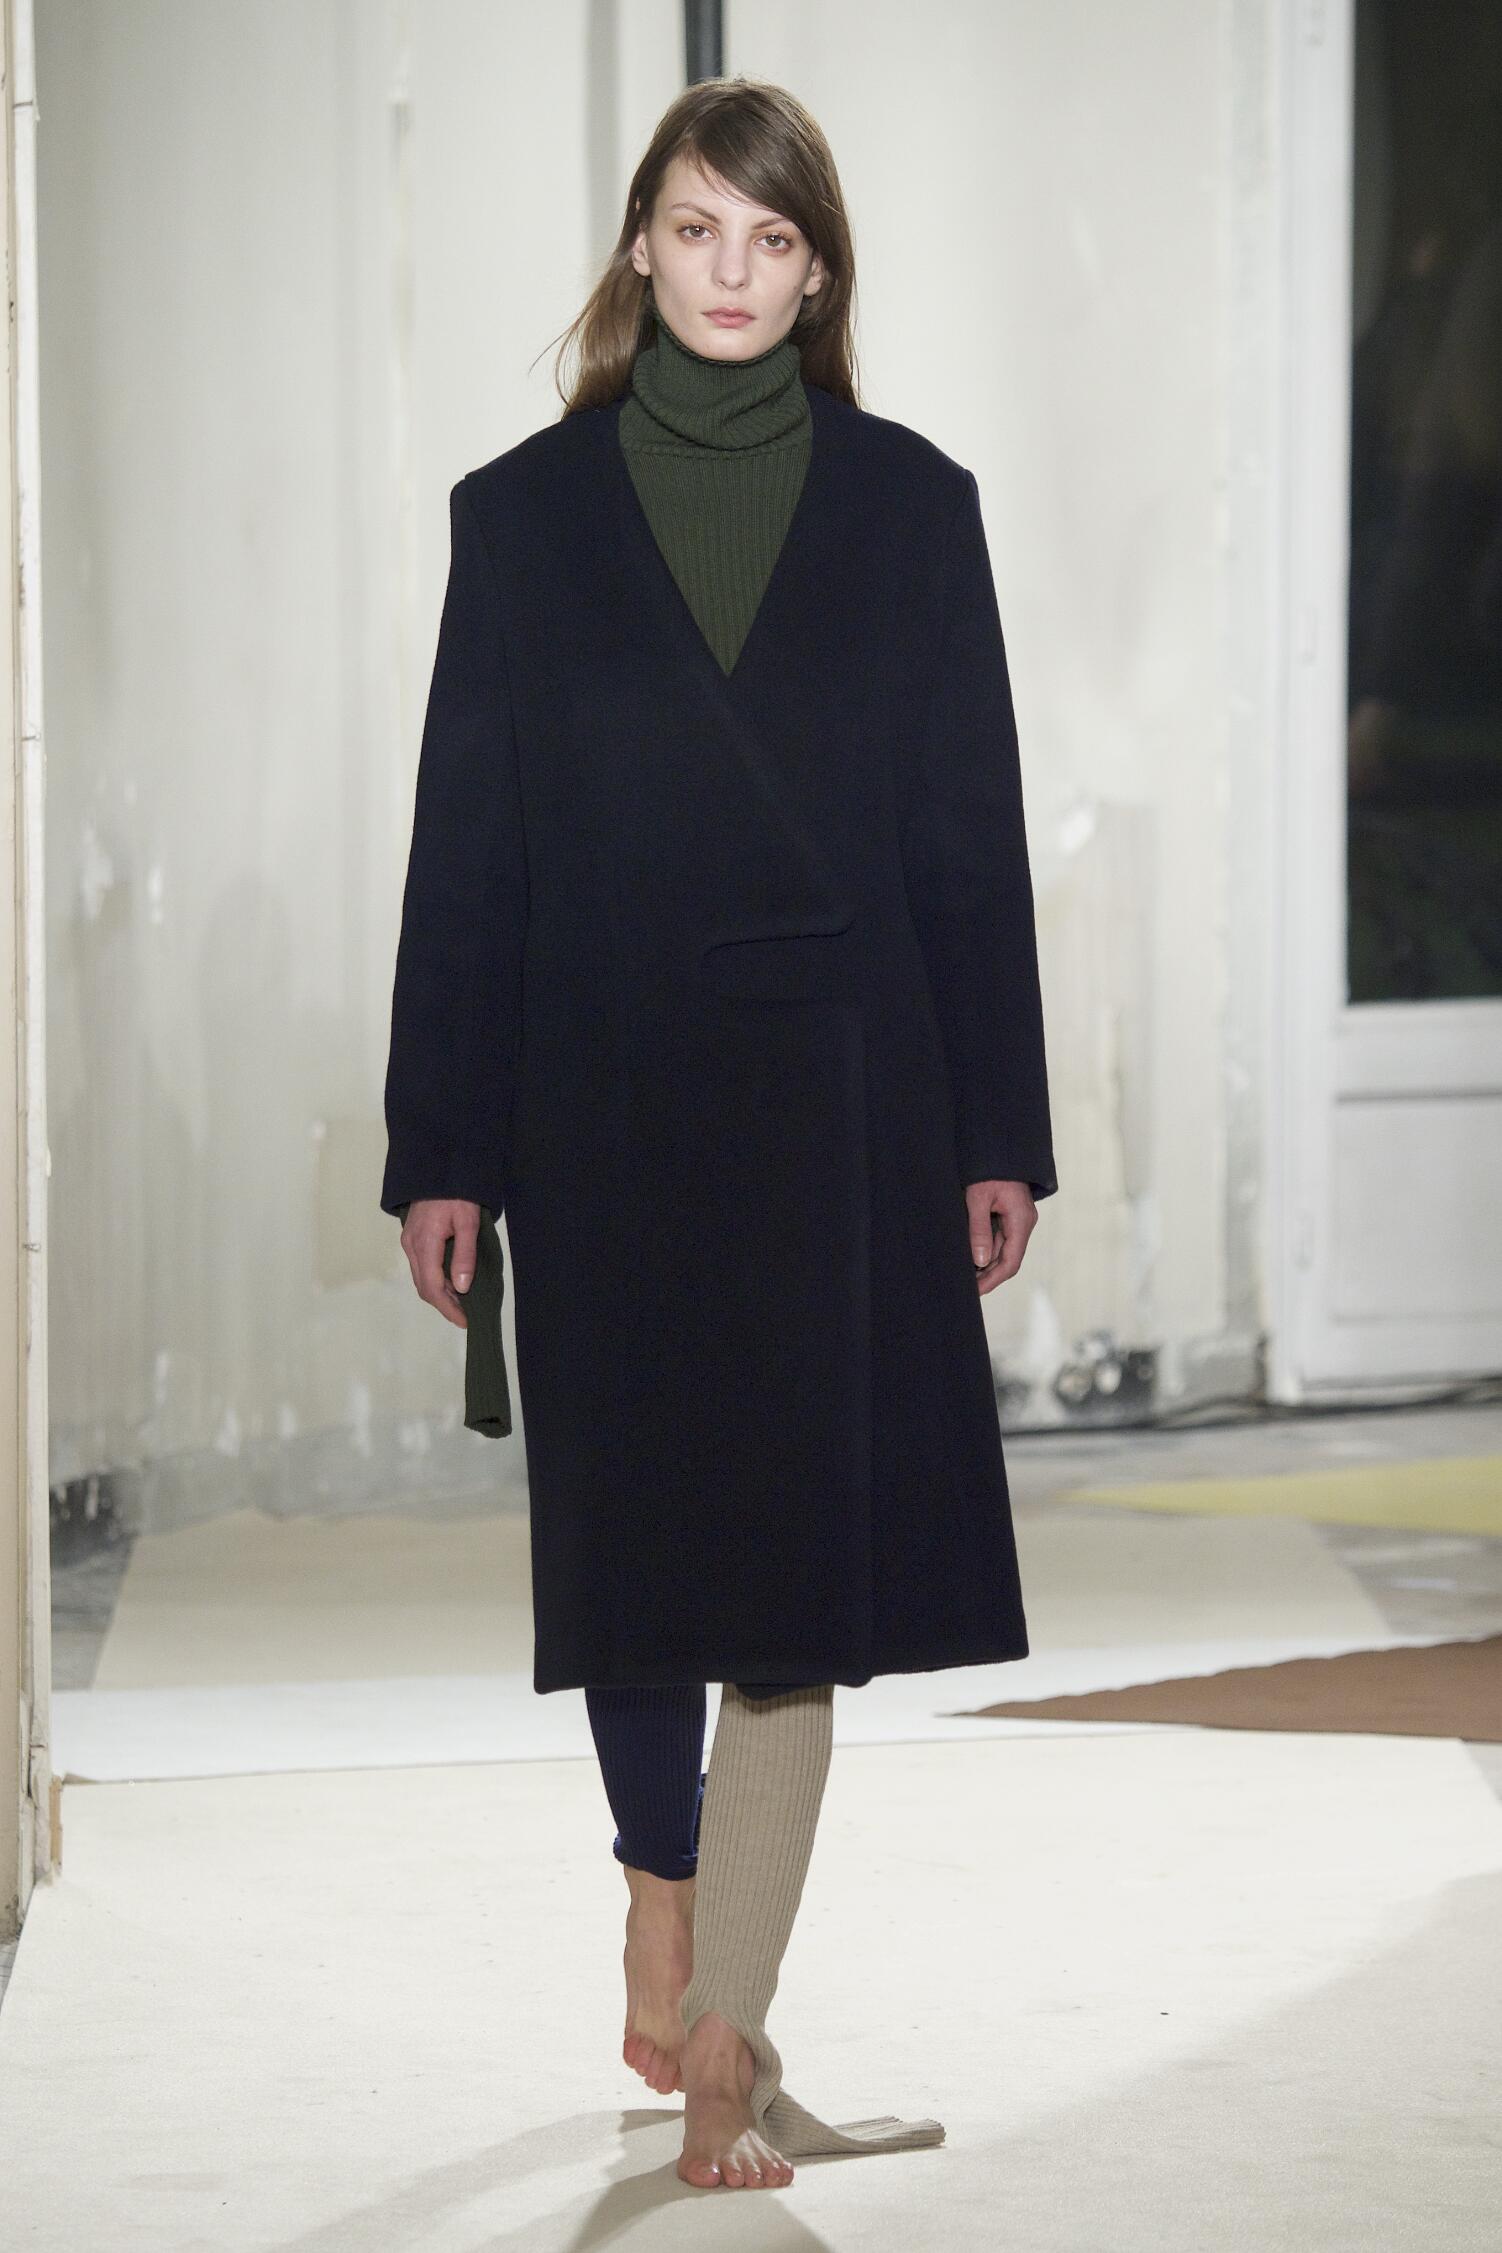 JACQUEMUS FALL WINTER 2015-16 WOMEN'S COLLECTION | The Skinny Beep